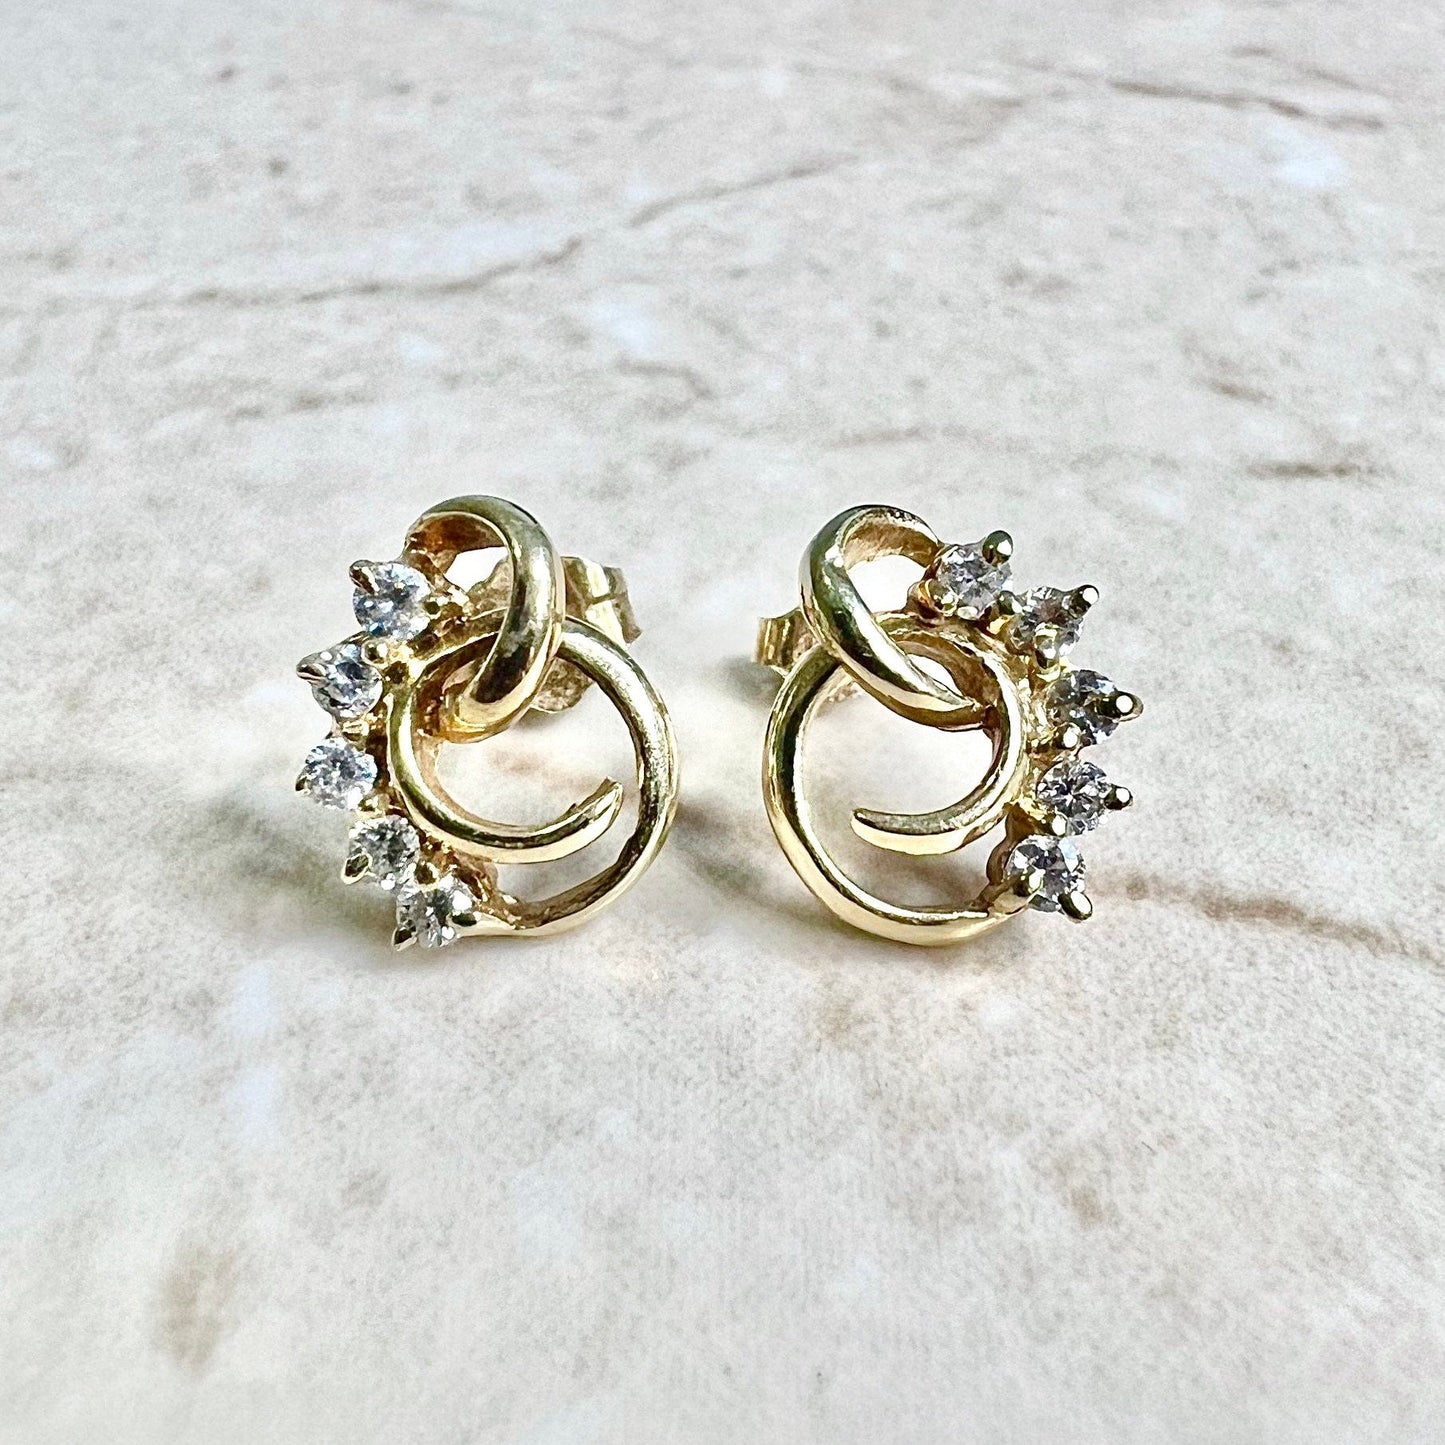 Vintage 14K Gold Diamond Earrings - Yellow Gold Earrings - Diamond Stud Earrings - Everyday Earrings - Birthday Gift - Best Gifts For Her